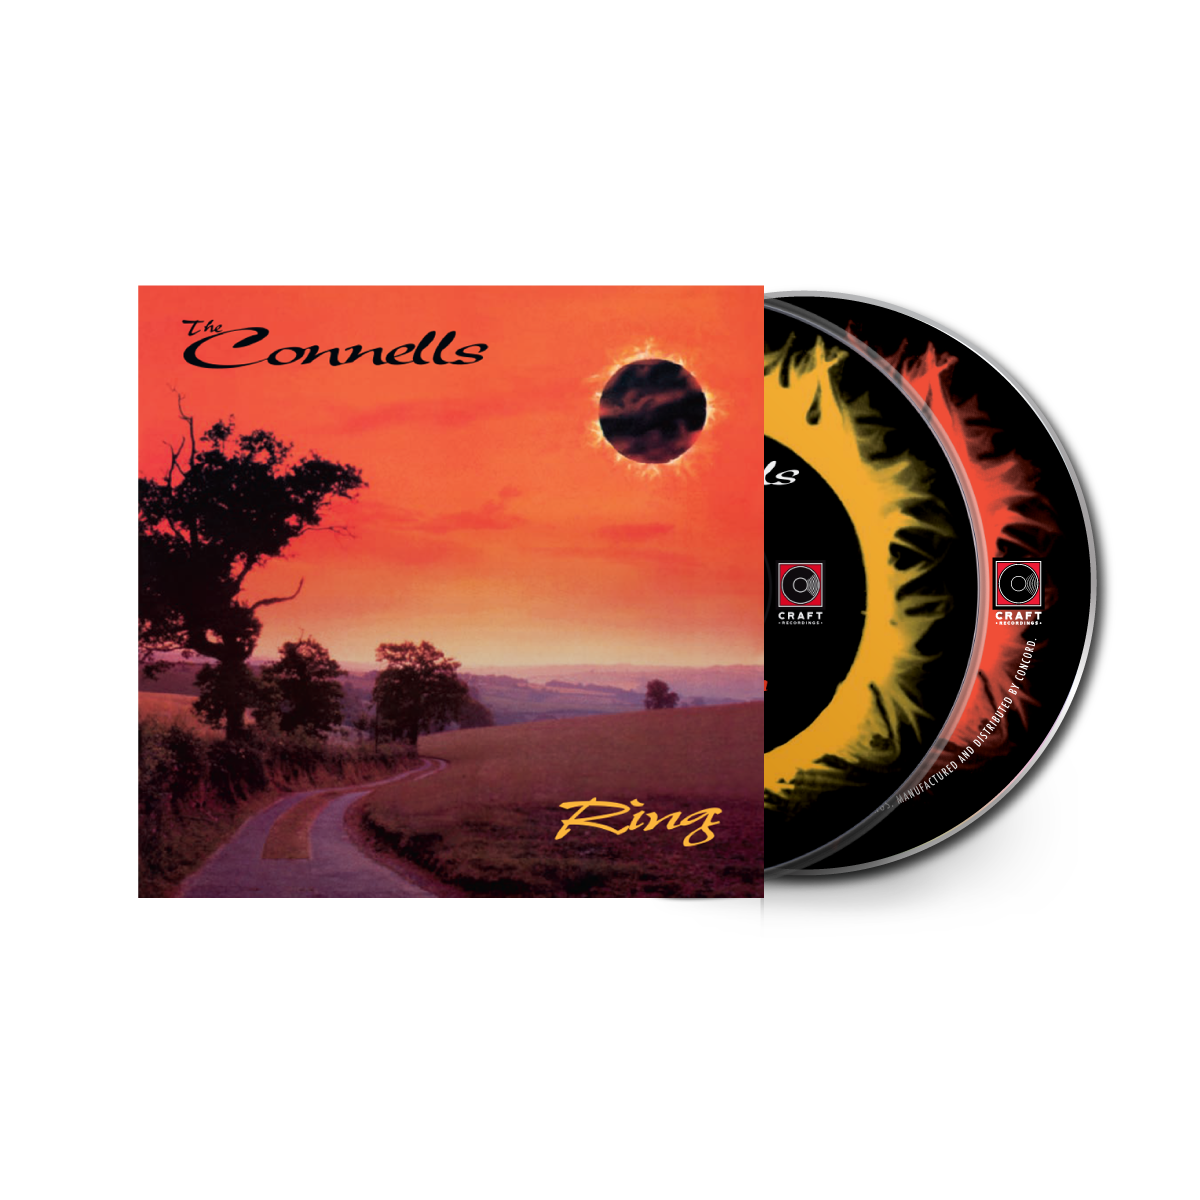 The Connells - Ring - 2CD